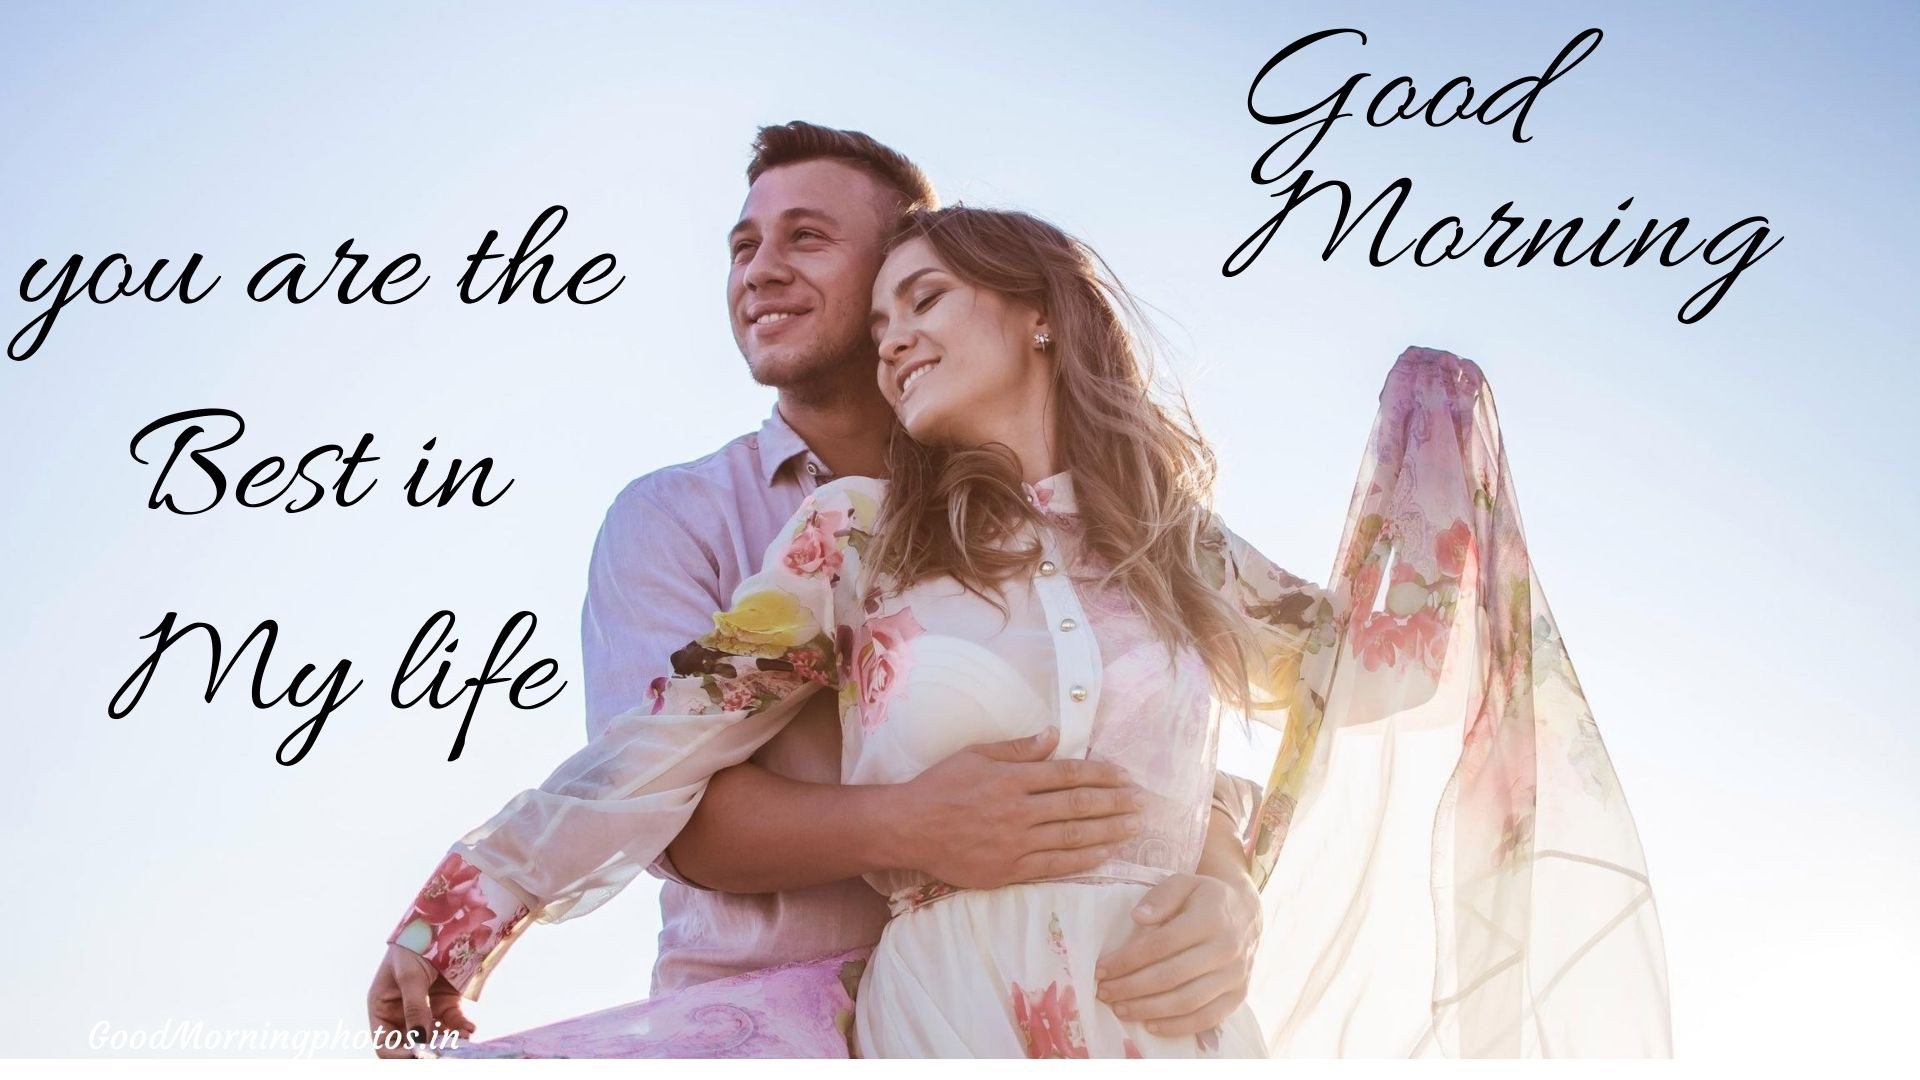 Romantic Good Morning Quotes For Him
 143 Best Romantic Good Morning Quotes